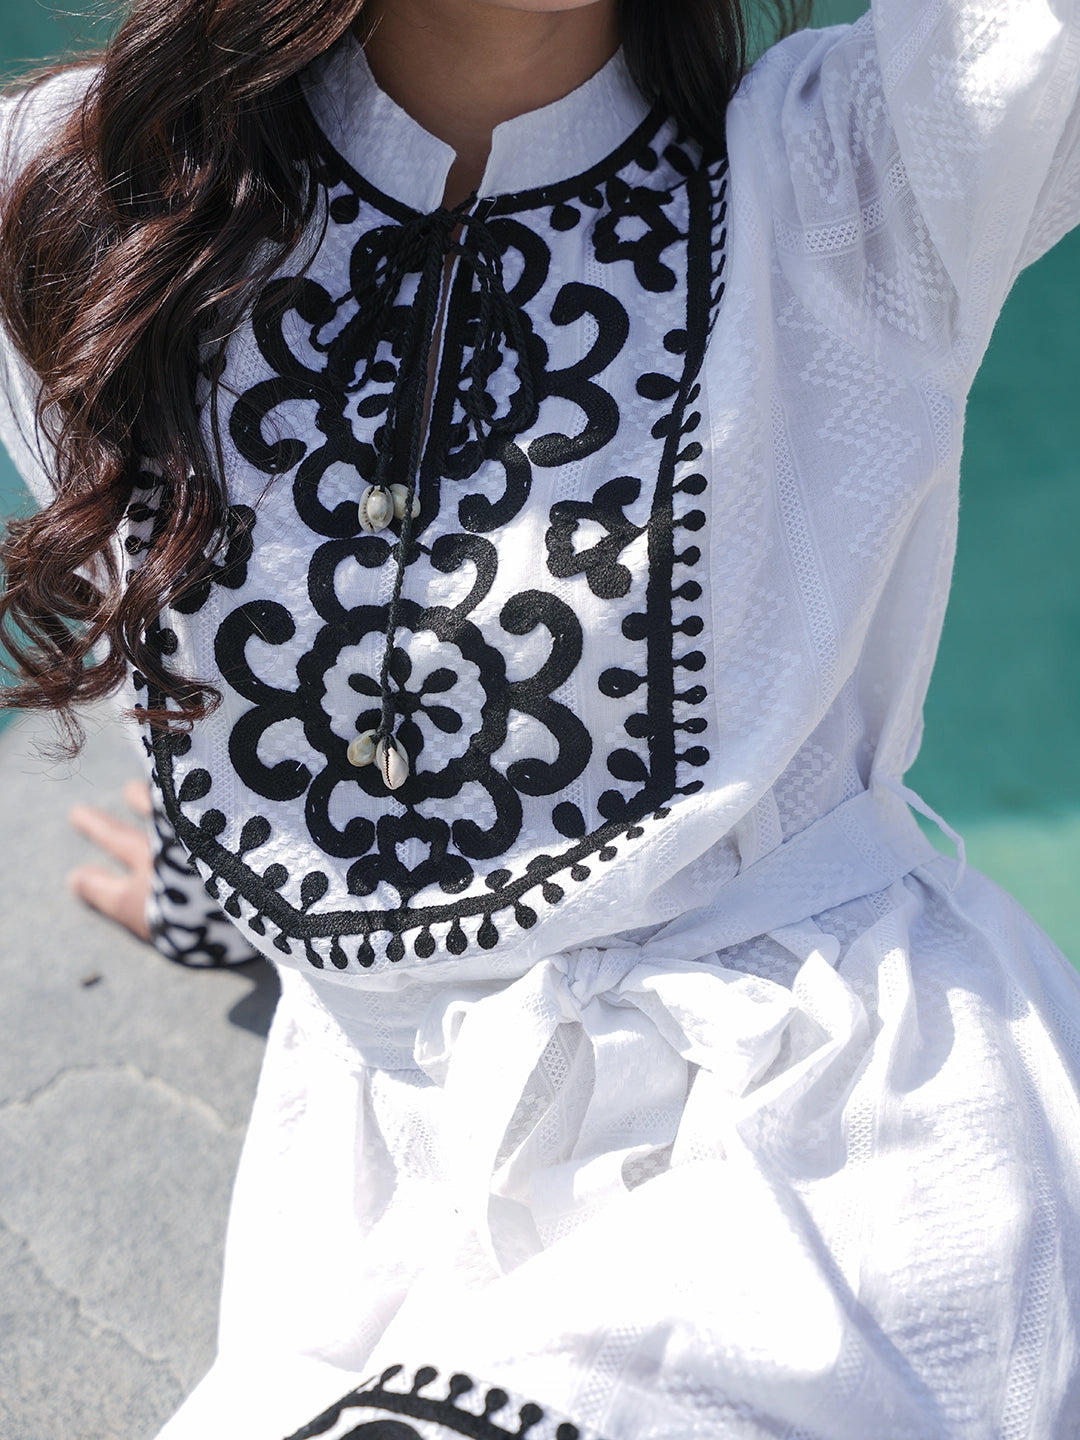 Monochrome Muse: White Short Dress with Black Embroidery